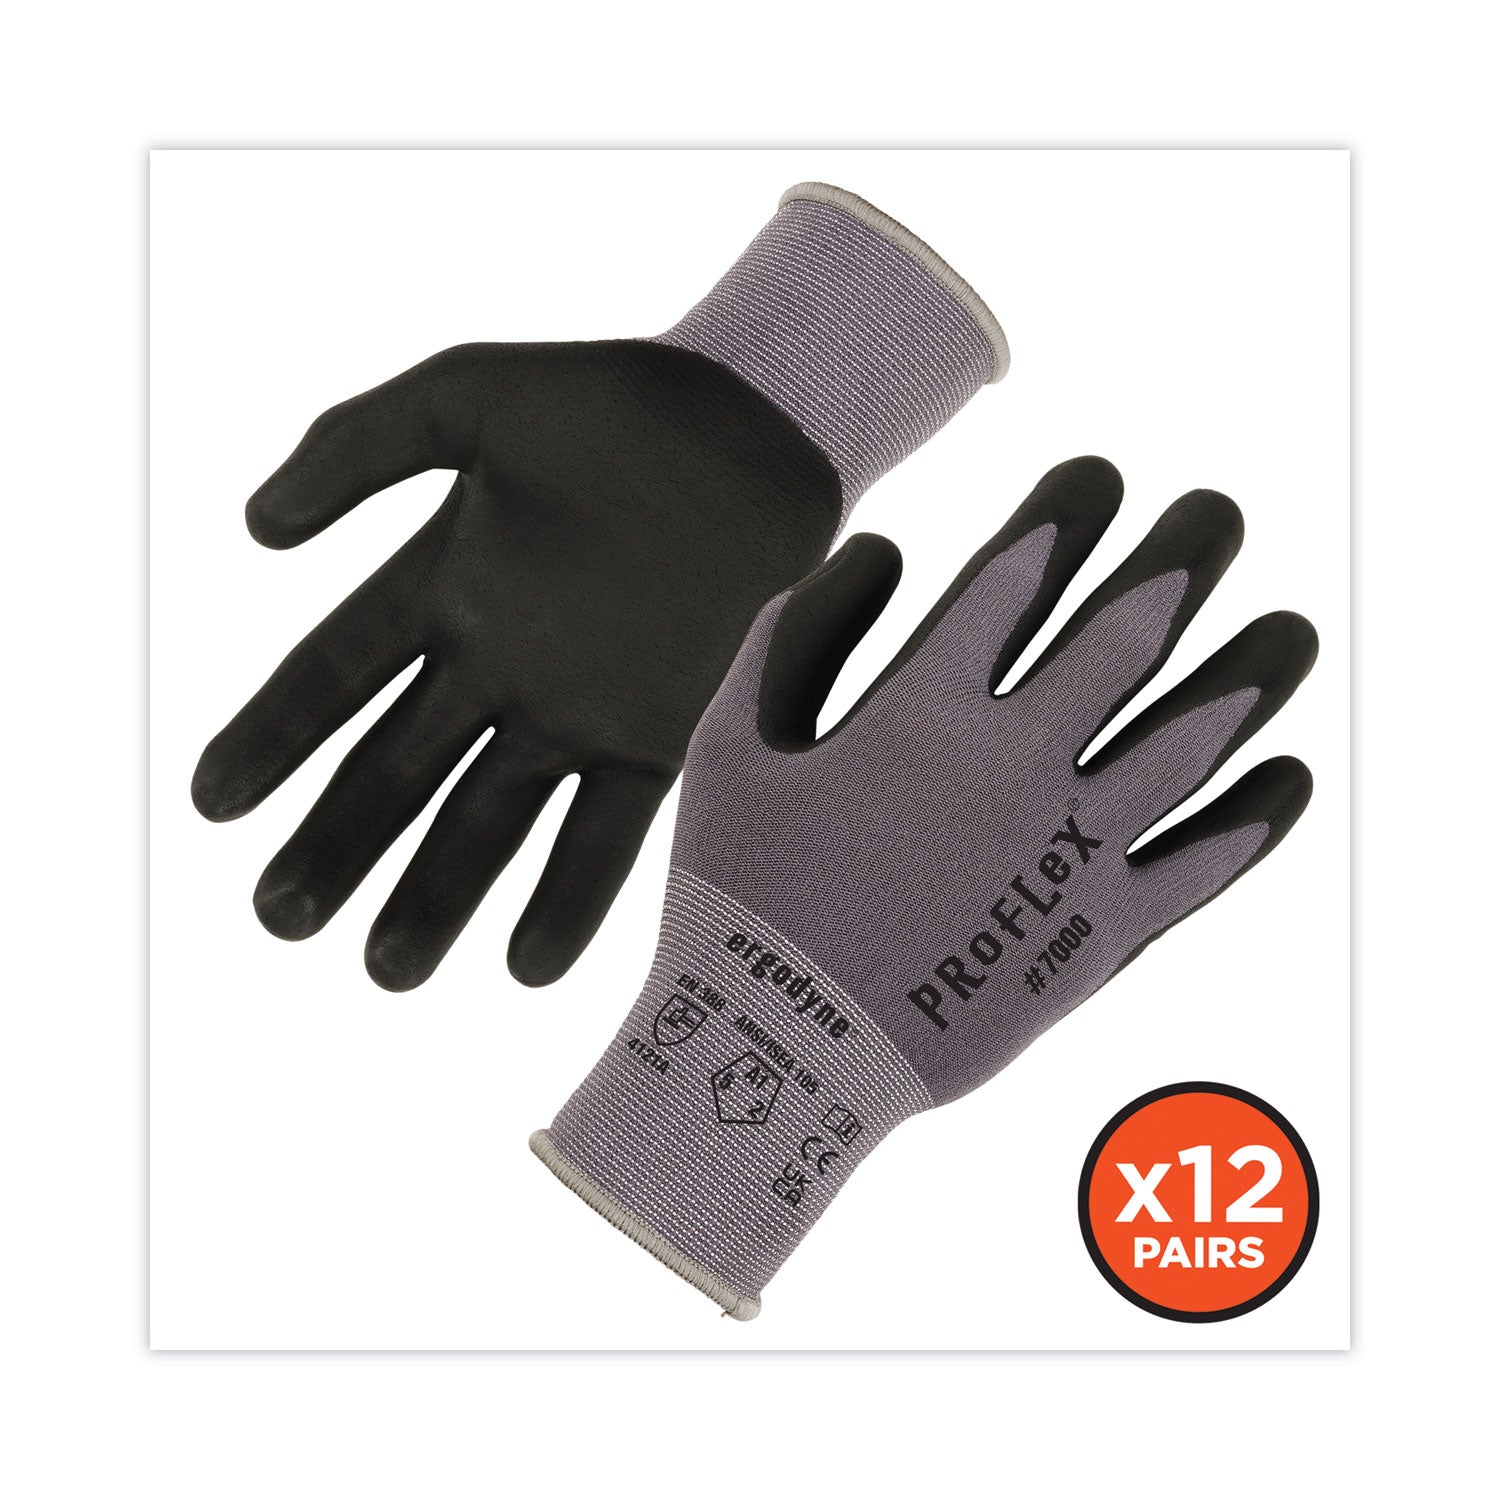 proflex-7000-nitrile-coated-gloves-microfoam-palm-gray-x-large-12-pairs-pack-ships-in-1-3-business-days_ego10365 - 2